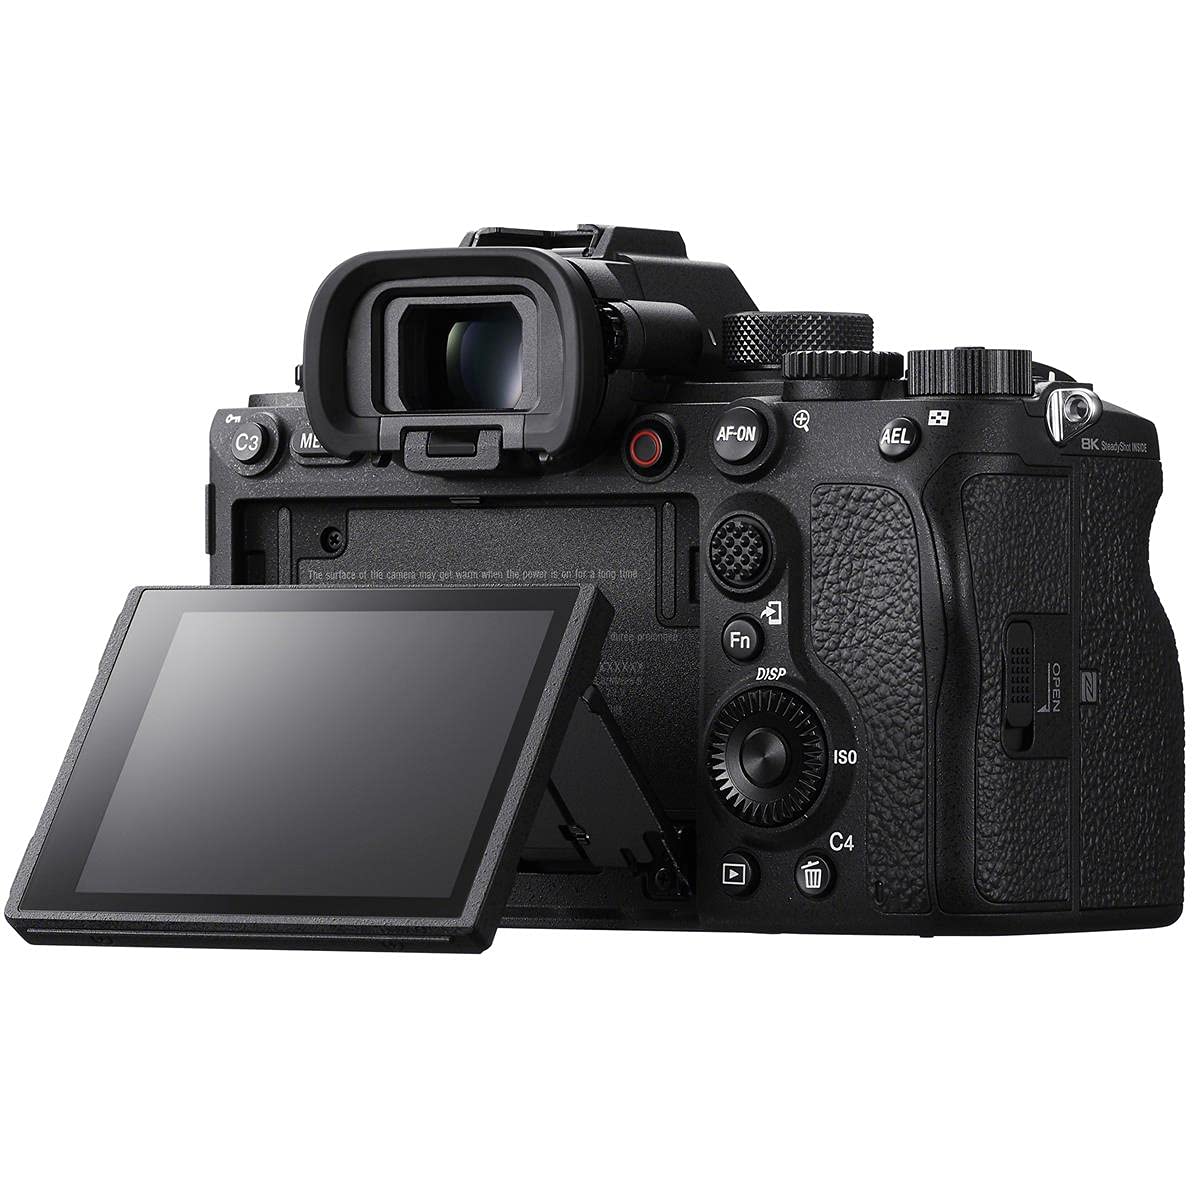 Sony Alpha 1 Mirrorless Digital Camera with Sony Tough 160GB CFexpress Type A Memory Card